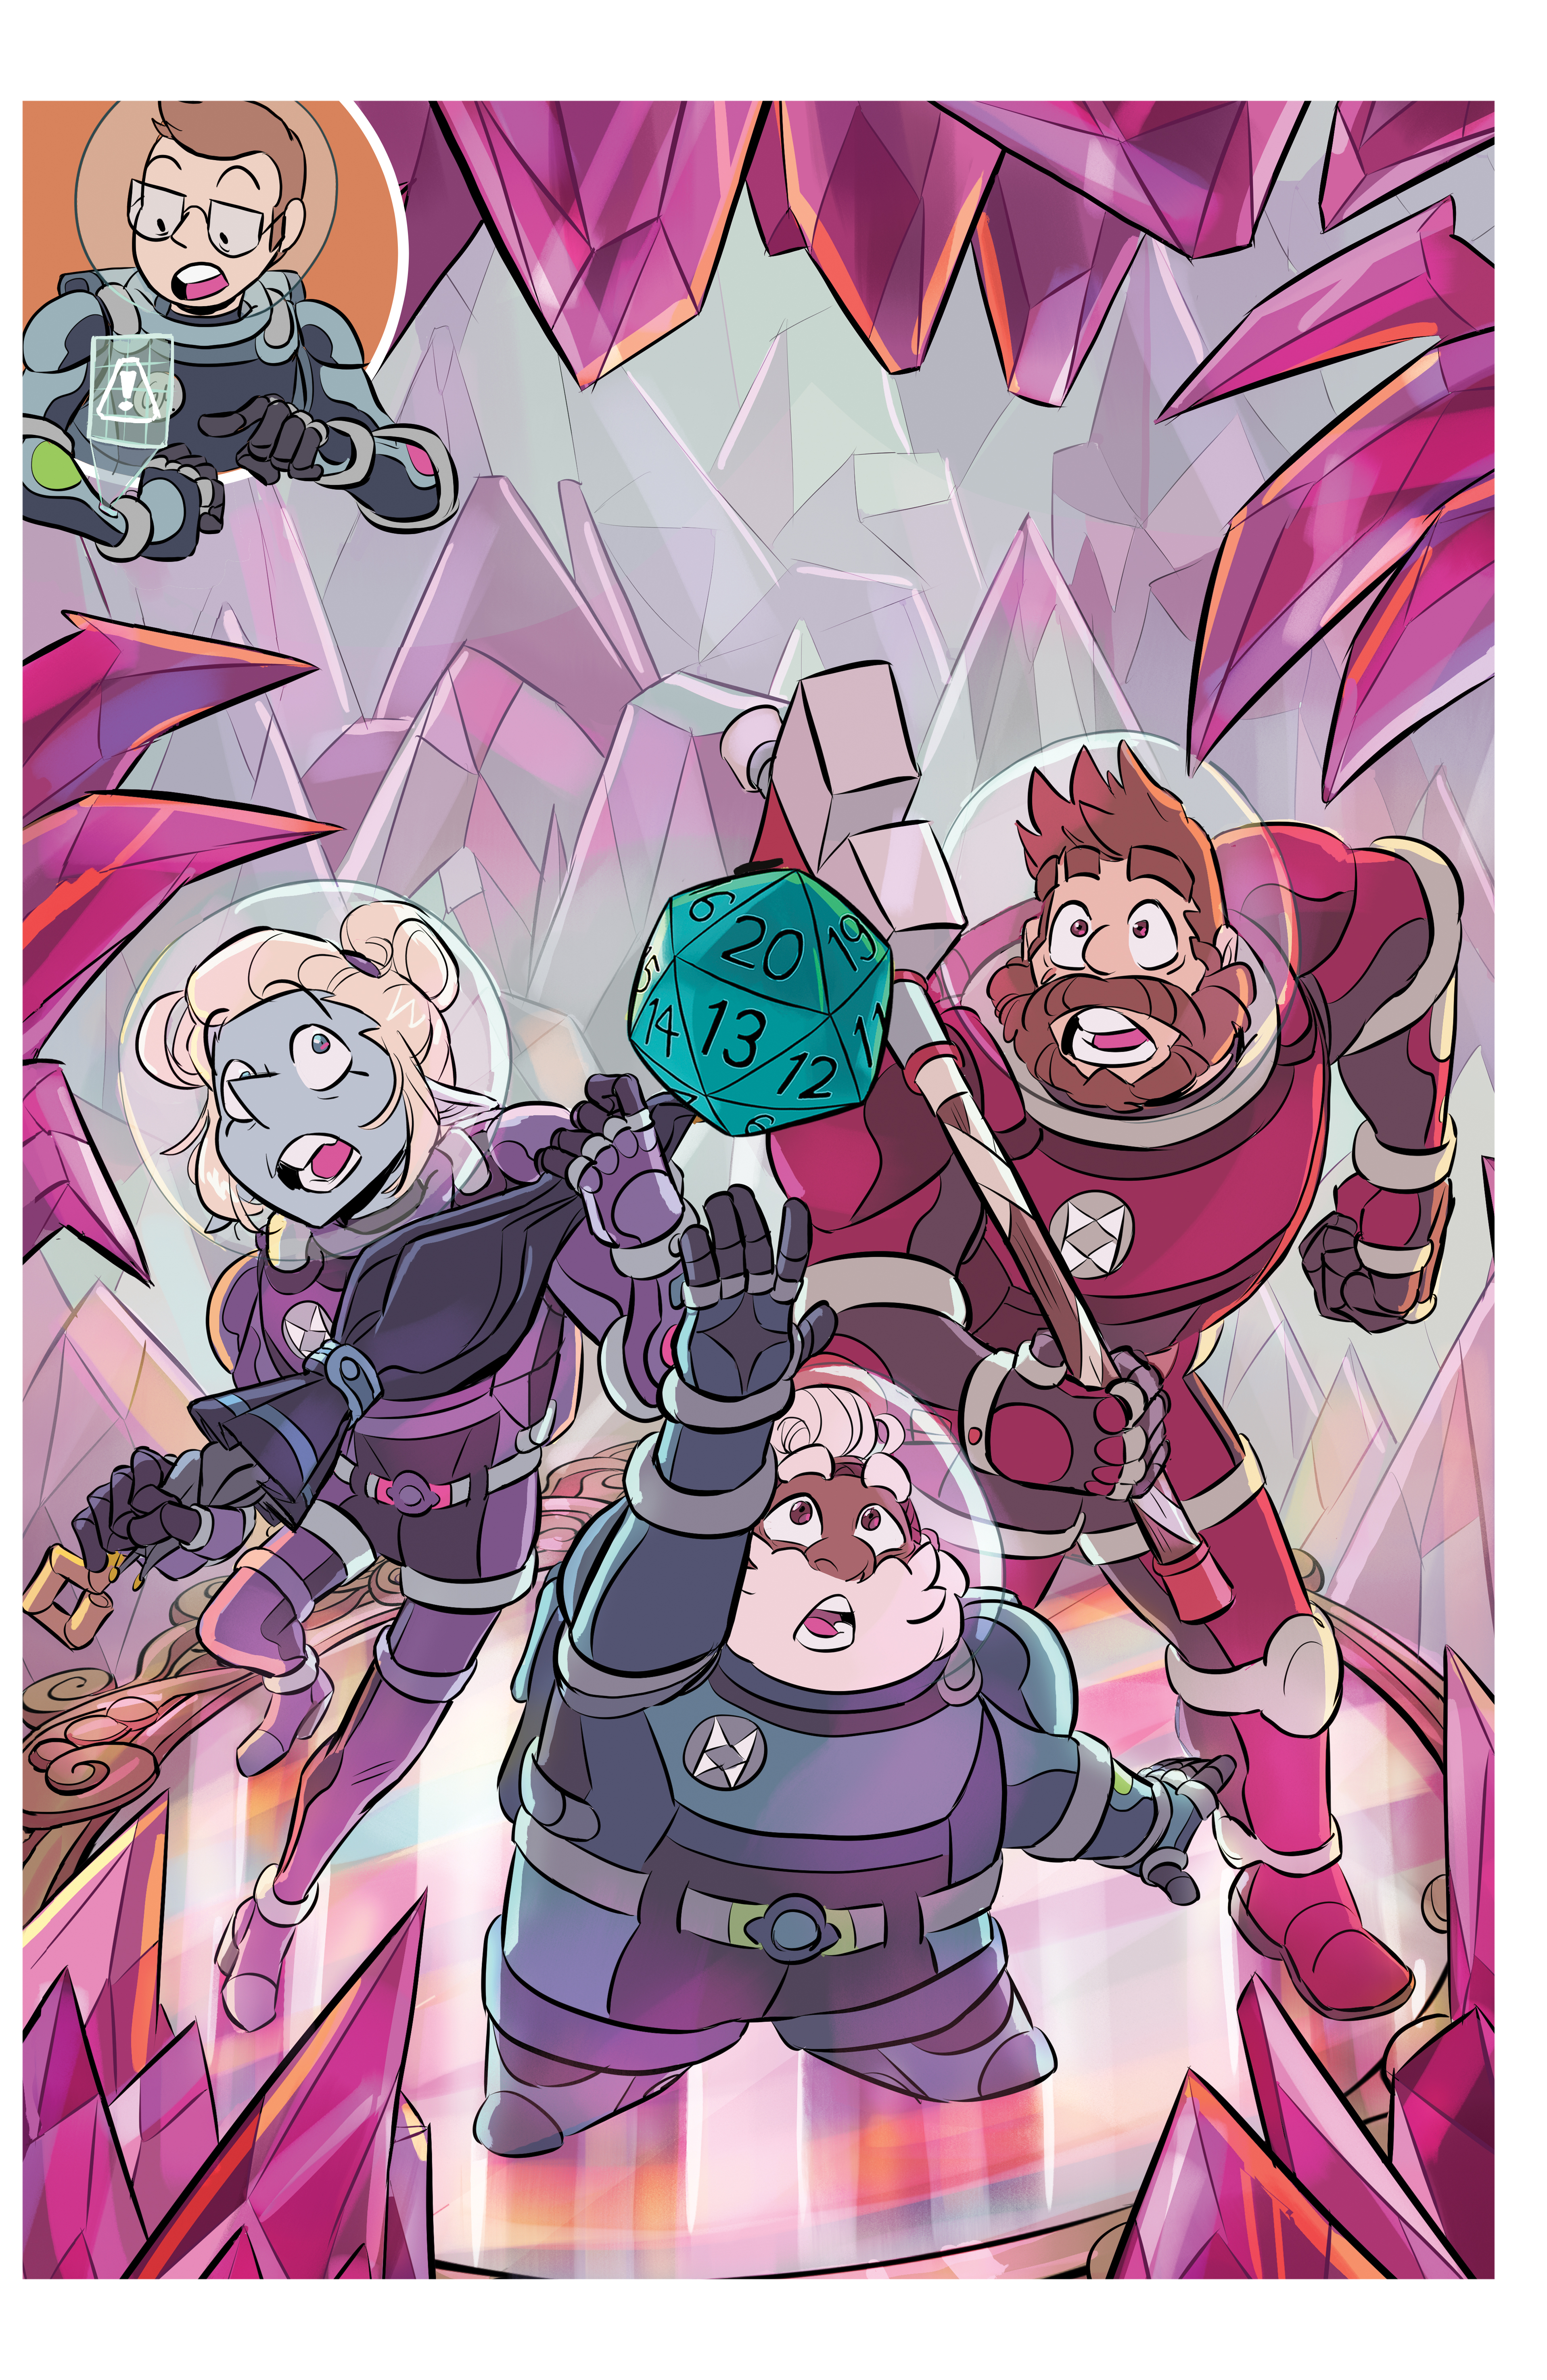 Taako, Merle, and Magnus are pursuing a d20 surrounded by pink tourmaline crystals. The three of them are wearing protective suits with glass helmets, standing on a pink tourmaline mirror.